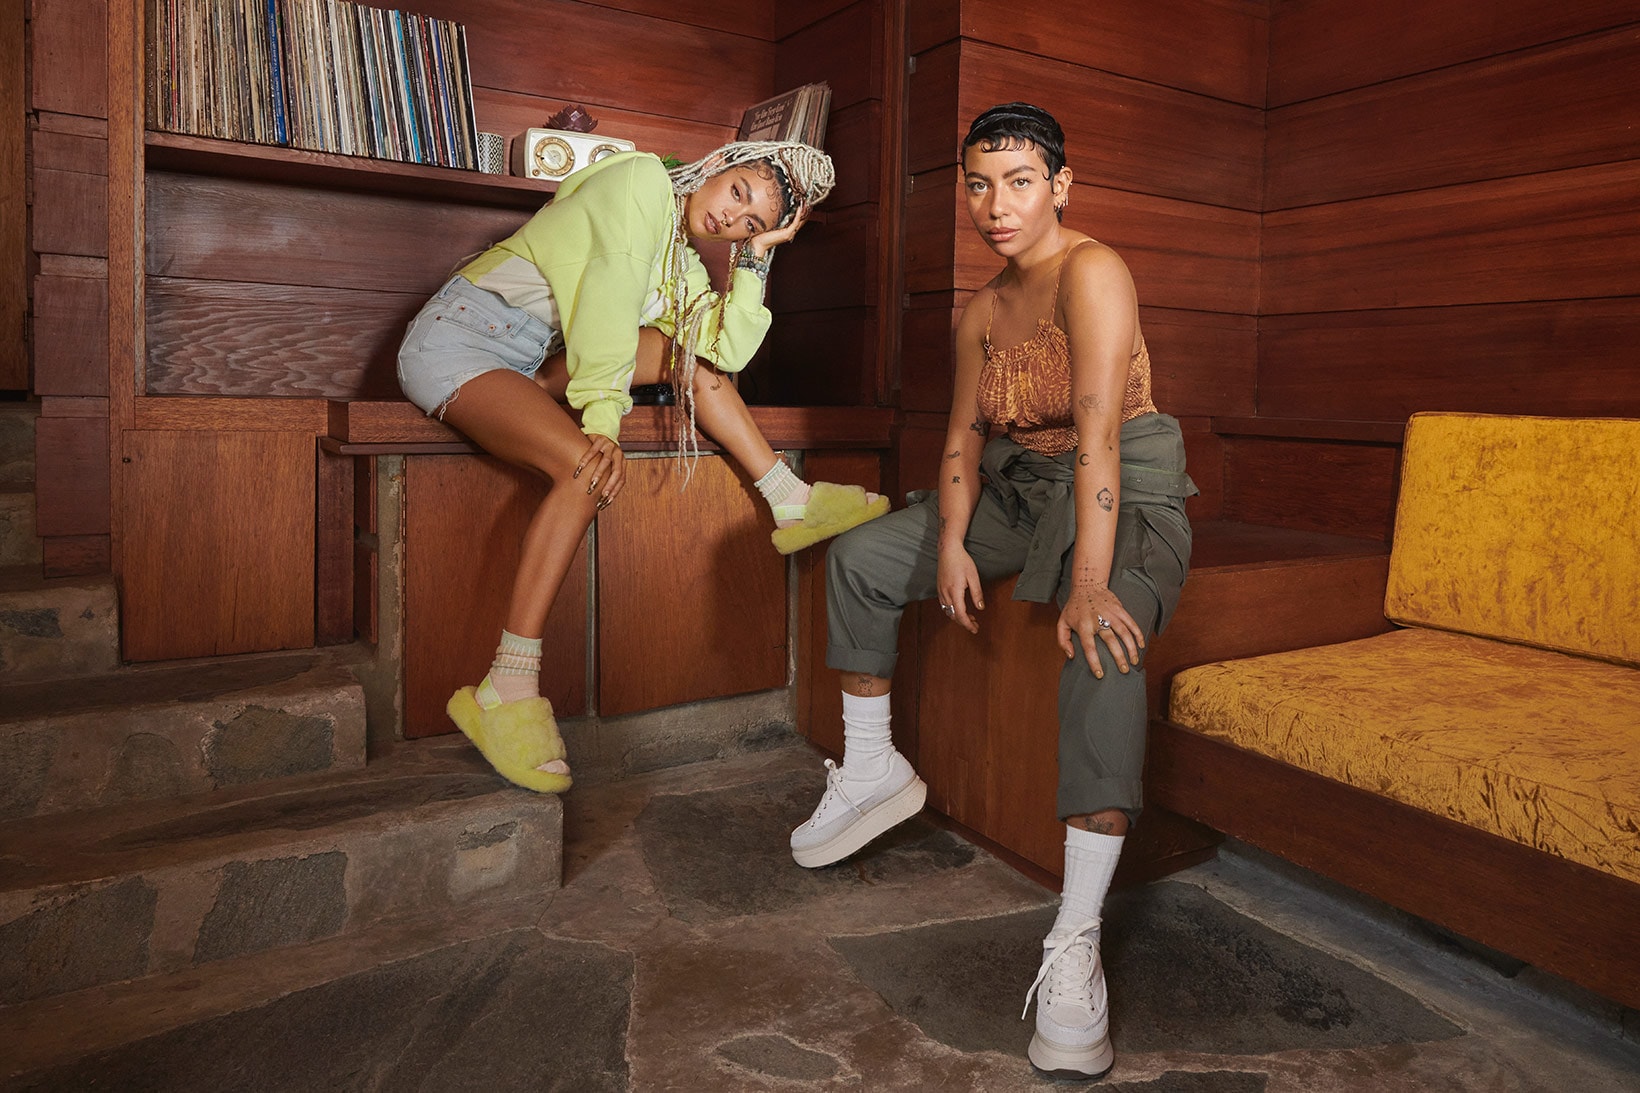 ugg spring summer collection campaign quin blai bailey quinones sneakers fluff yeah slides sandals sweater hoodie shorts pants